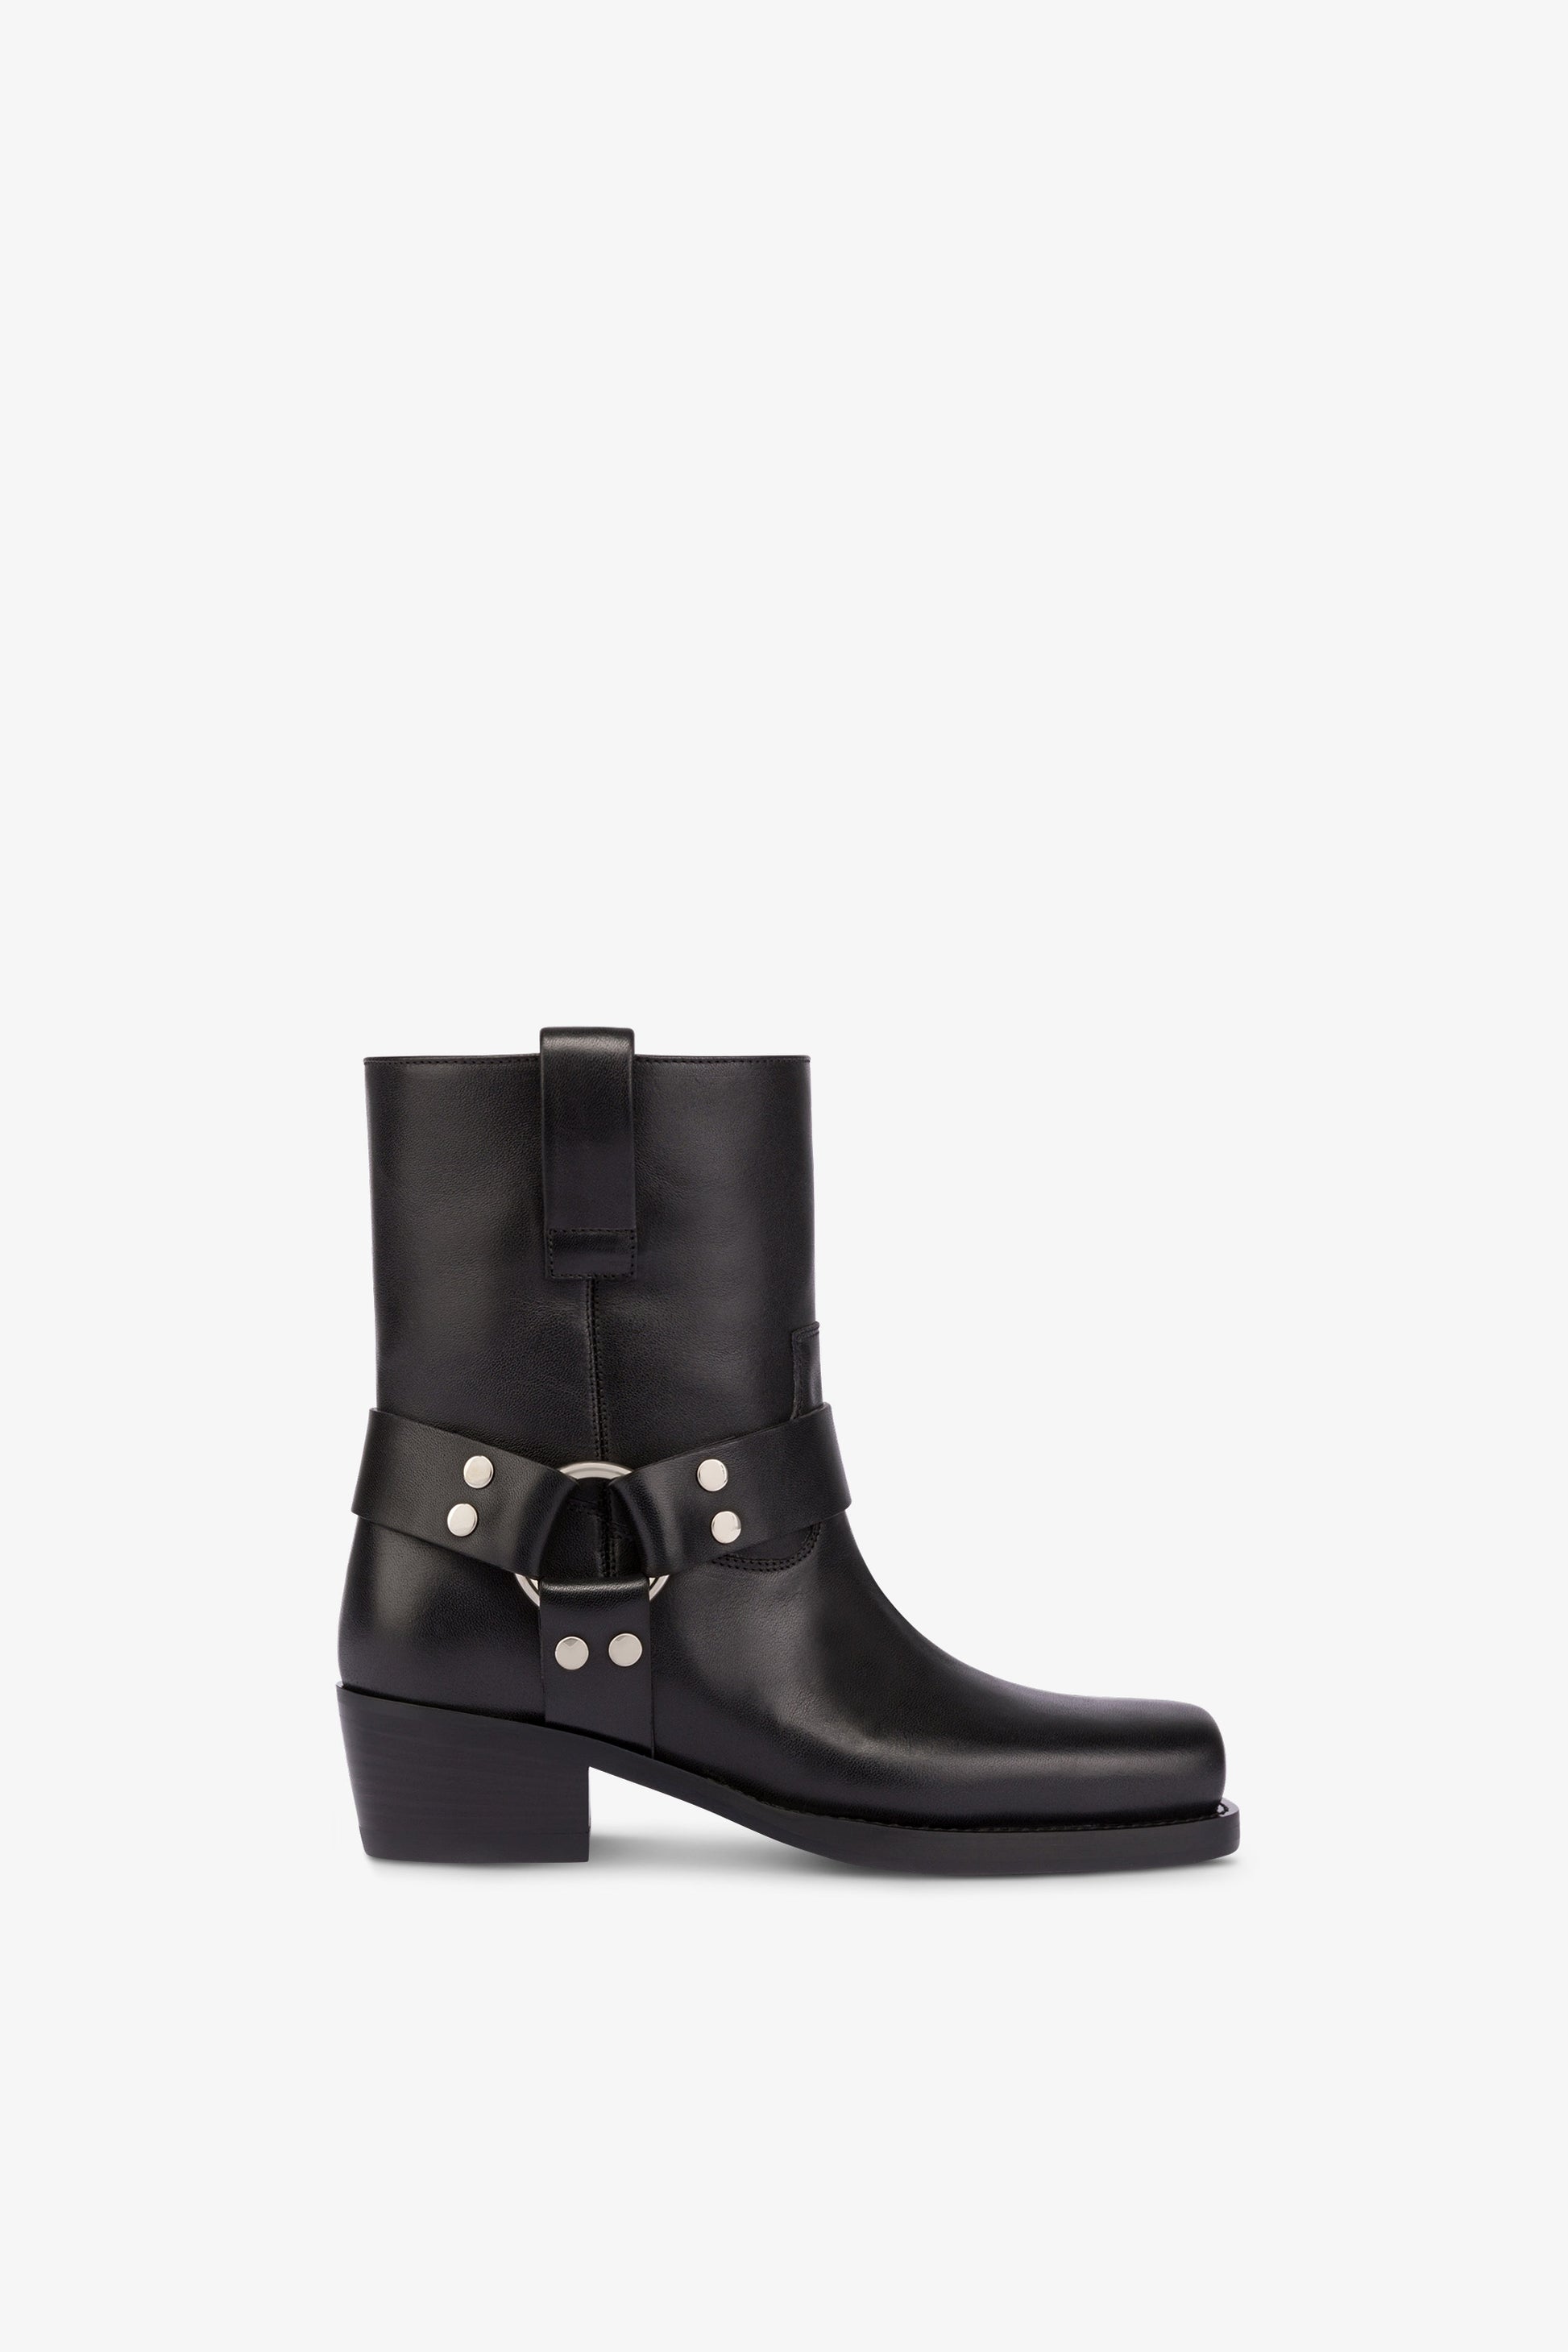 Square-toe ankle boots in smooth black leather